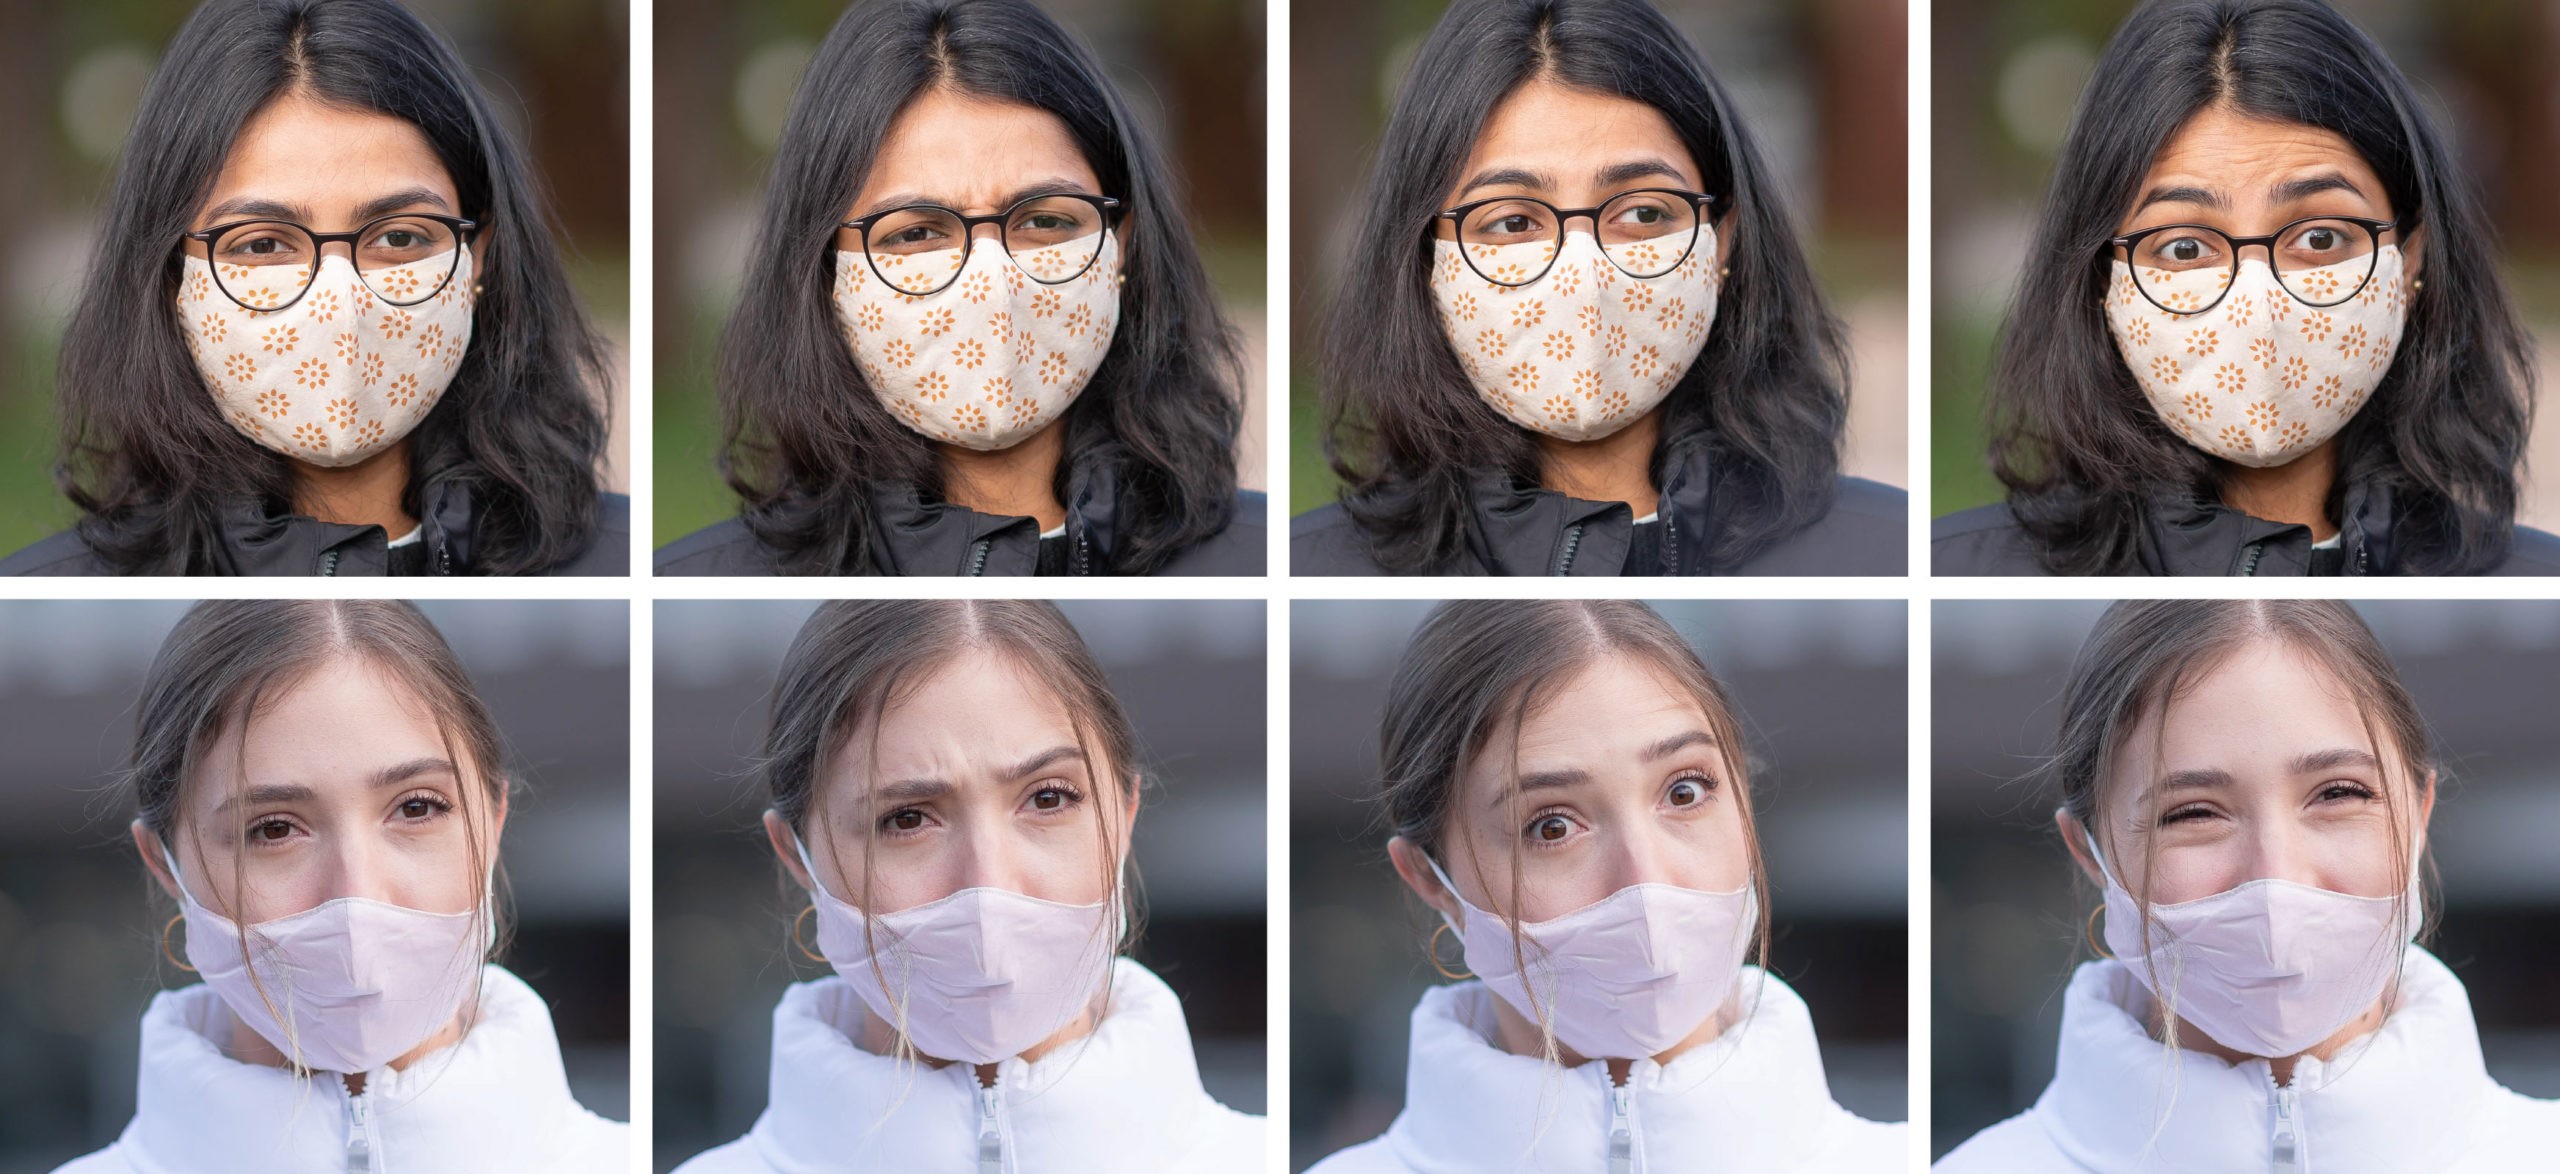 A series of images showing how eyes can help express what someone is saying when they are wearing a COVID-19 face mask